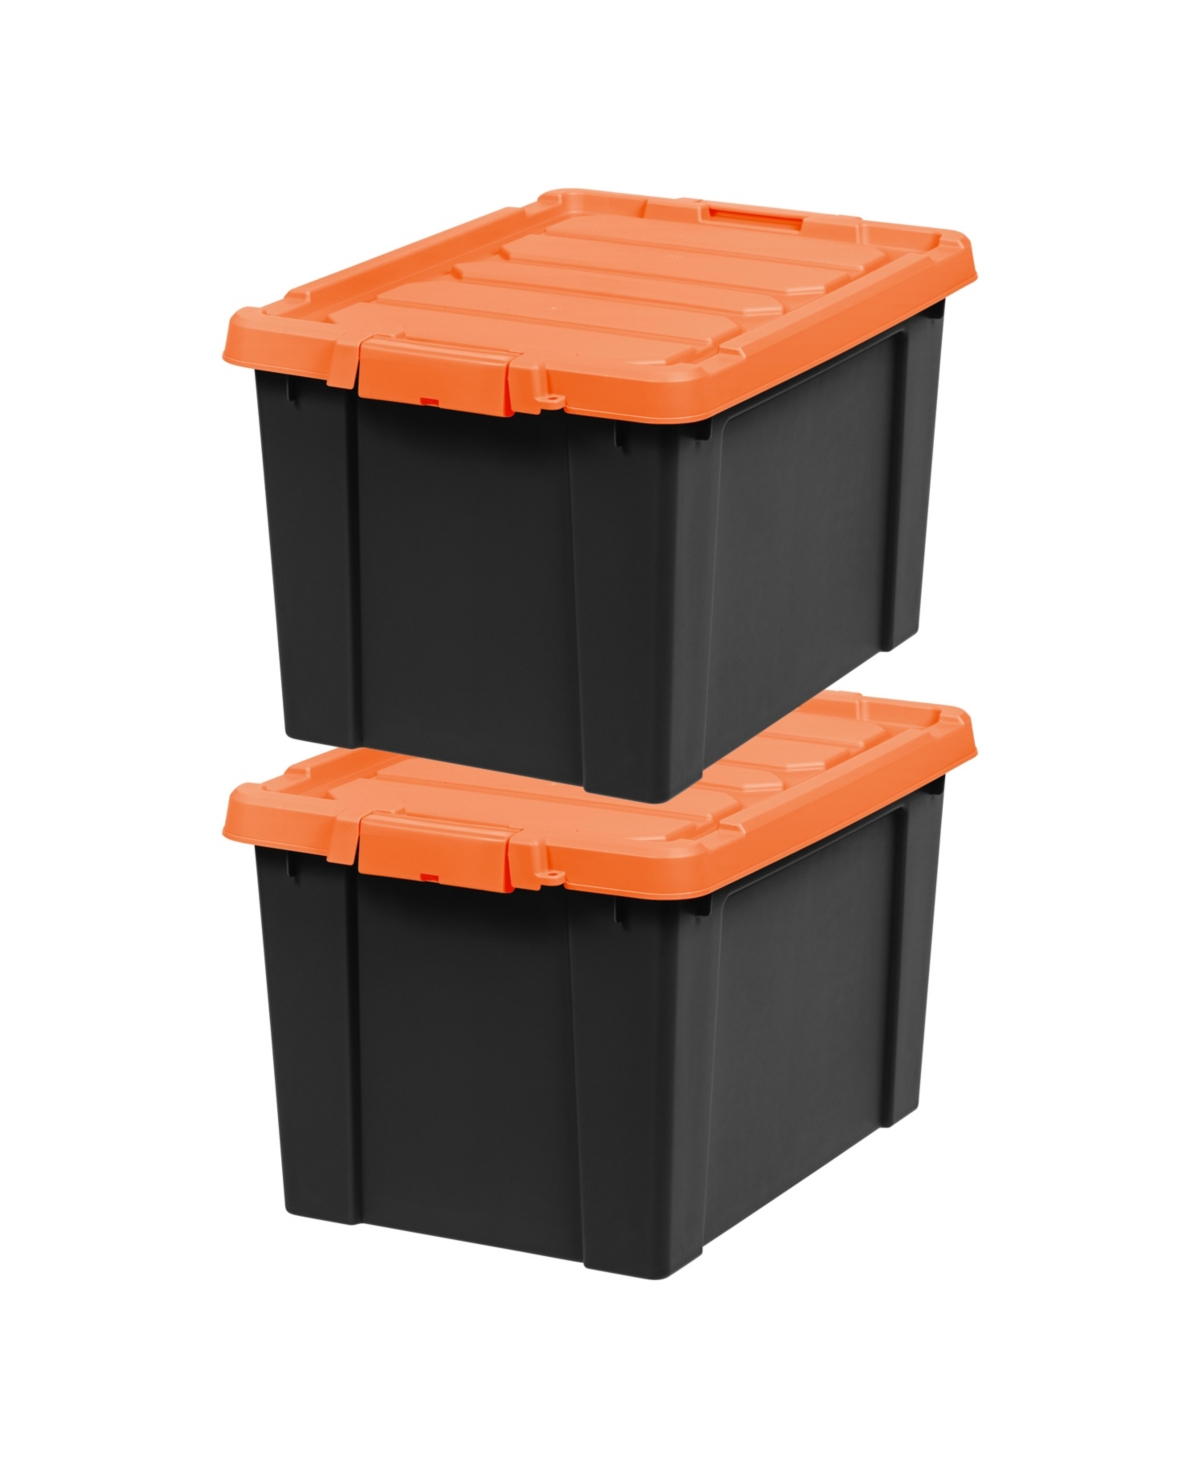 19 Gallon Lockable Storage Totes with Lids, 2 Pack - Orange Lid, Heavy-Duty Durable Stackable Containers, Large Garage Organizing Bins Moving